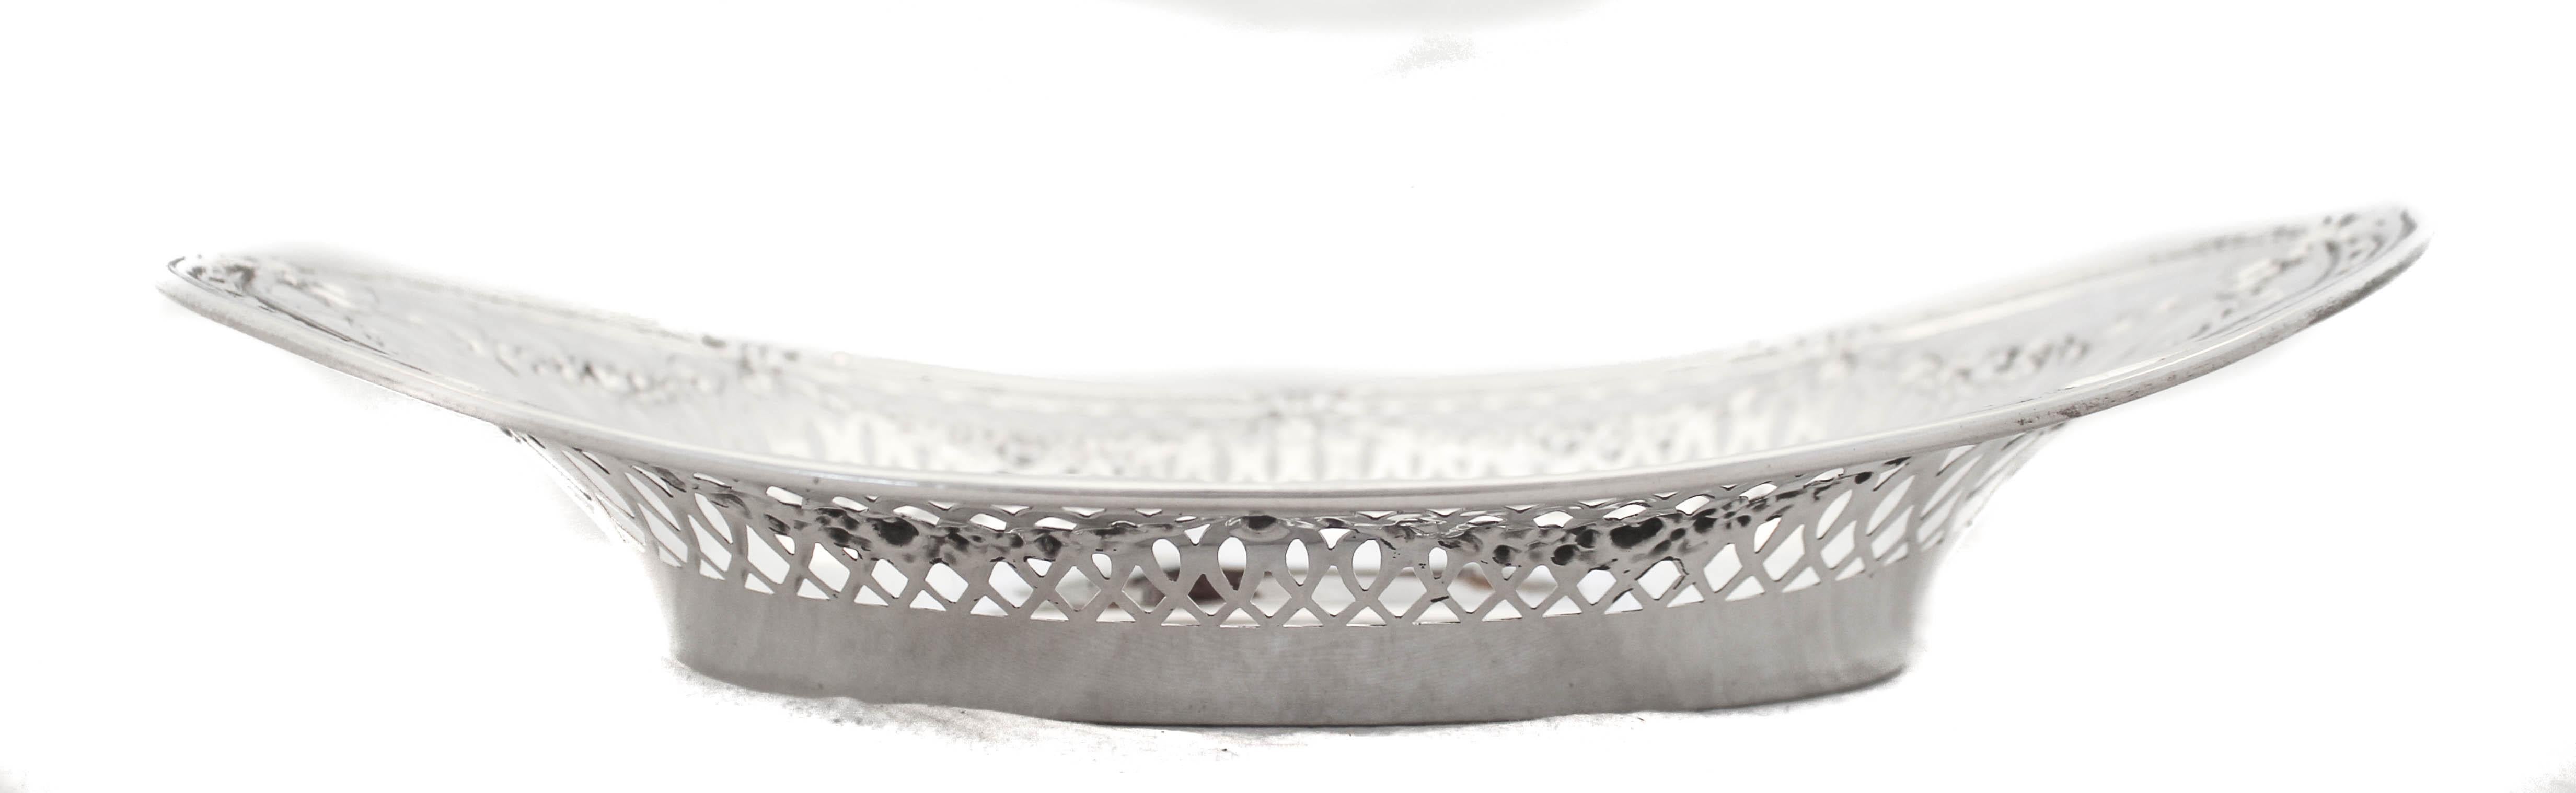 A beautiful sterling silver breadbasket by the Webster Silver Company; it is ornate and elegant. It has a geometric cutout pattern around the body with garlands draping over. Along the outer rim a motif of interlocking circles goes around the